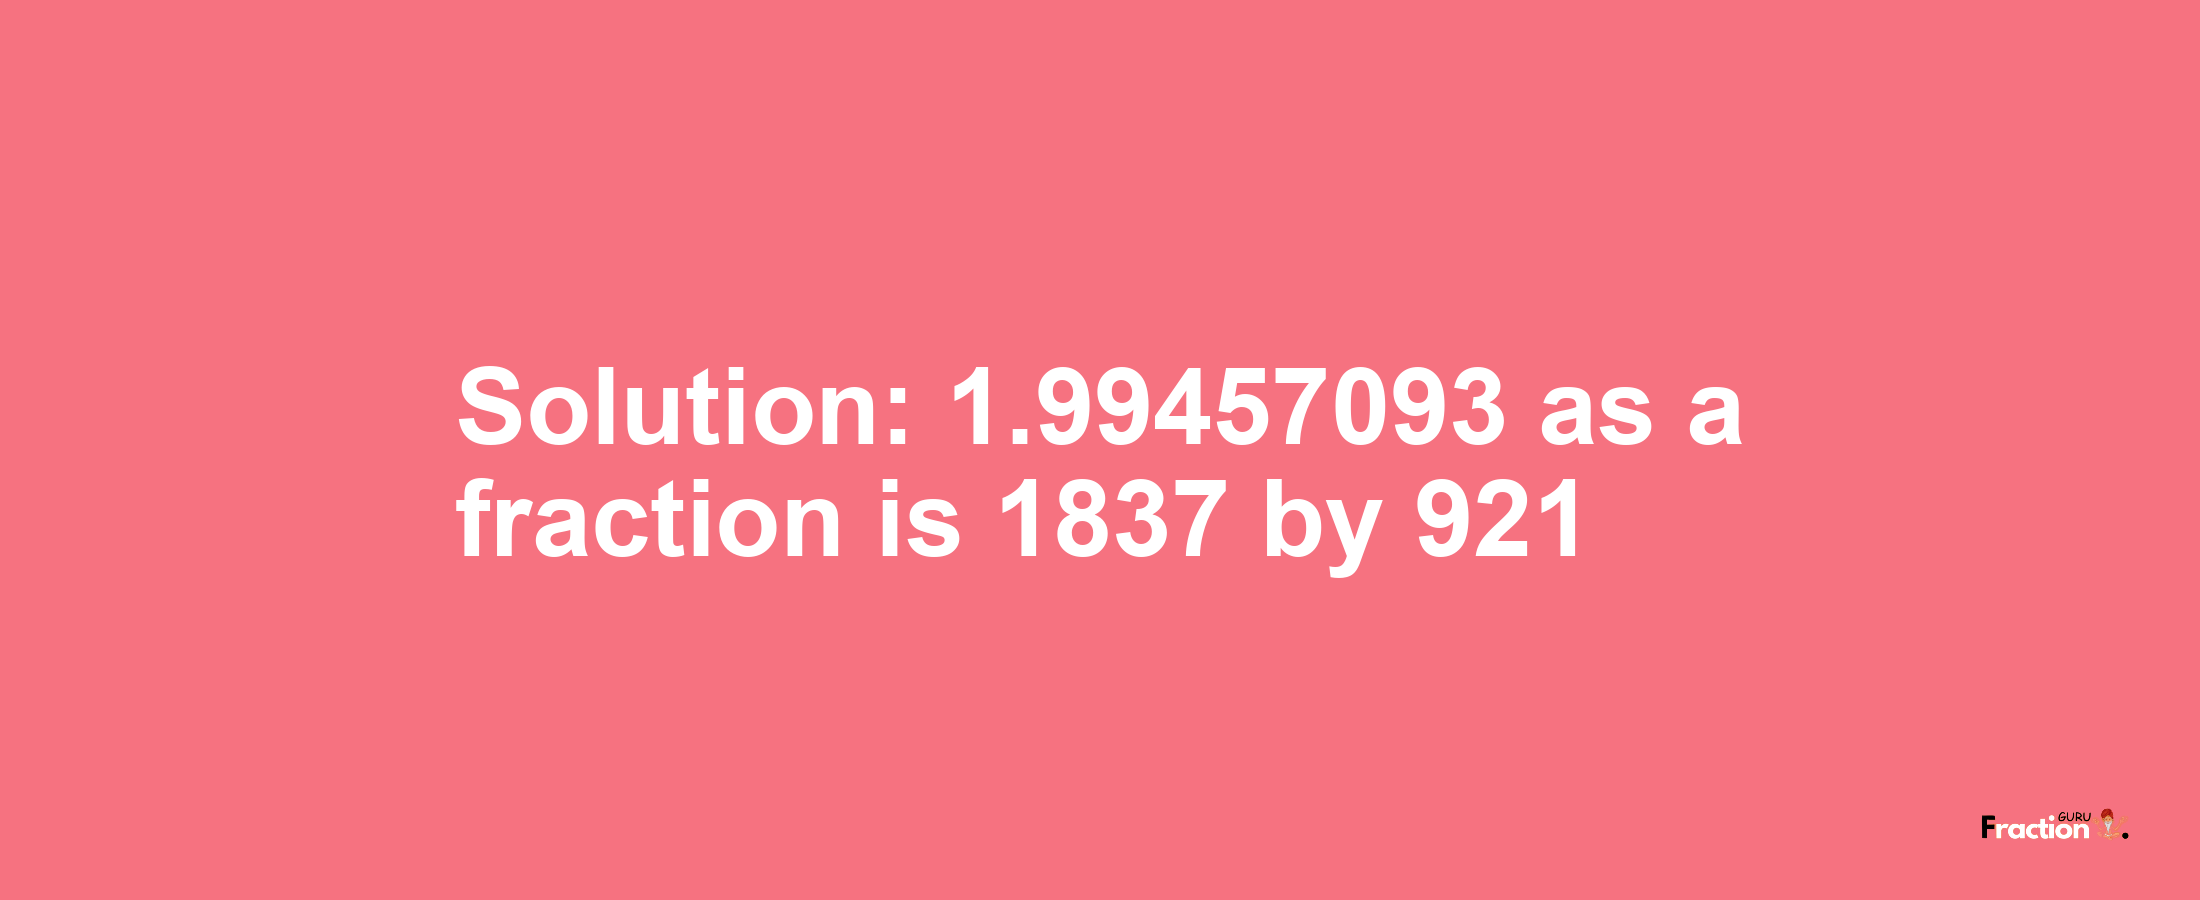 Solution:1.99457093 as a fraction is 1837/921